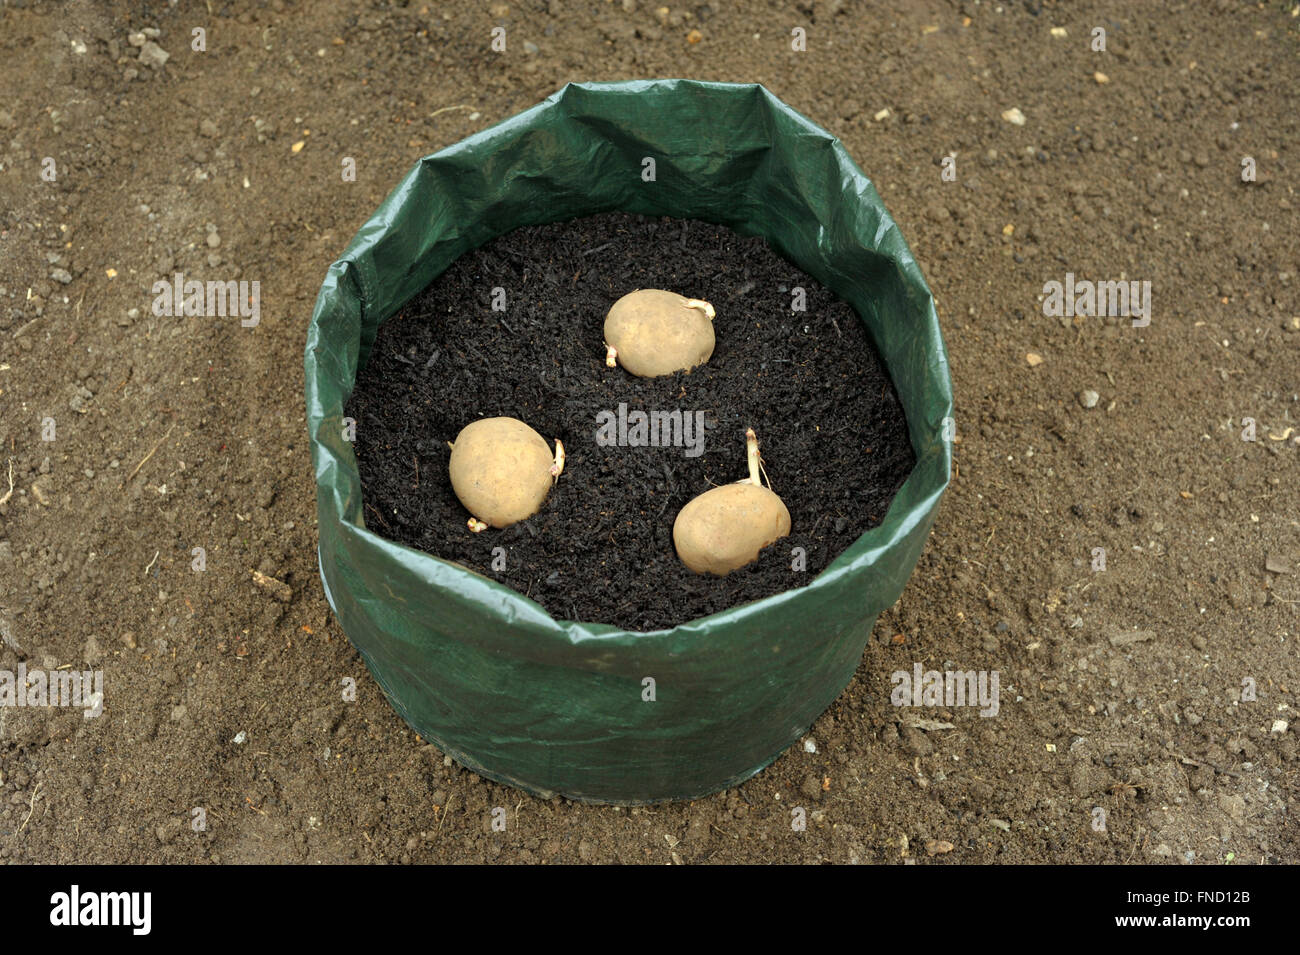 https://c8.alamy.com/comp/FND12B/planting-seed-potatoes-in-a-growing-bag-container-of-compost-for-space-FND12B.jpg